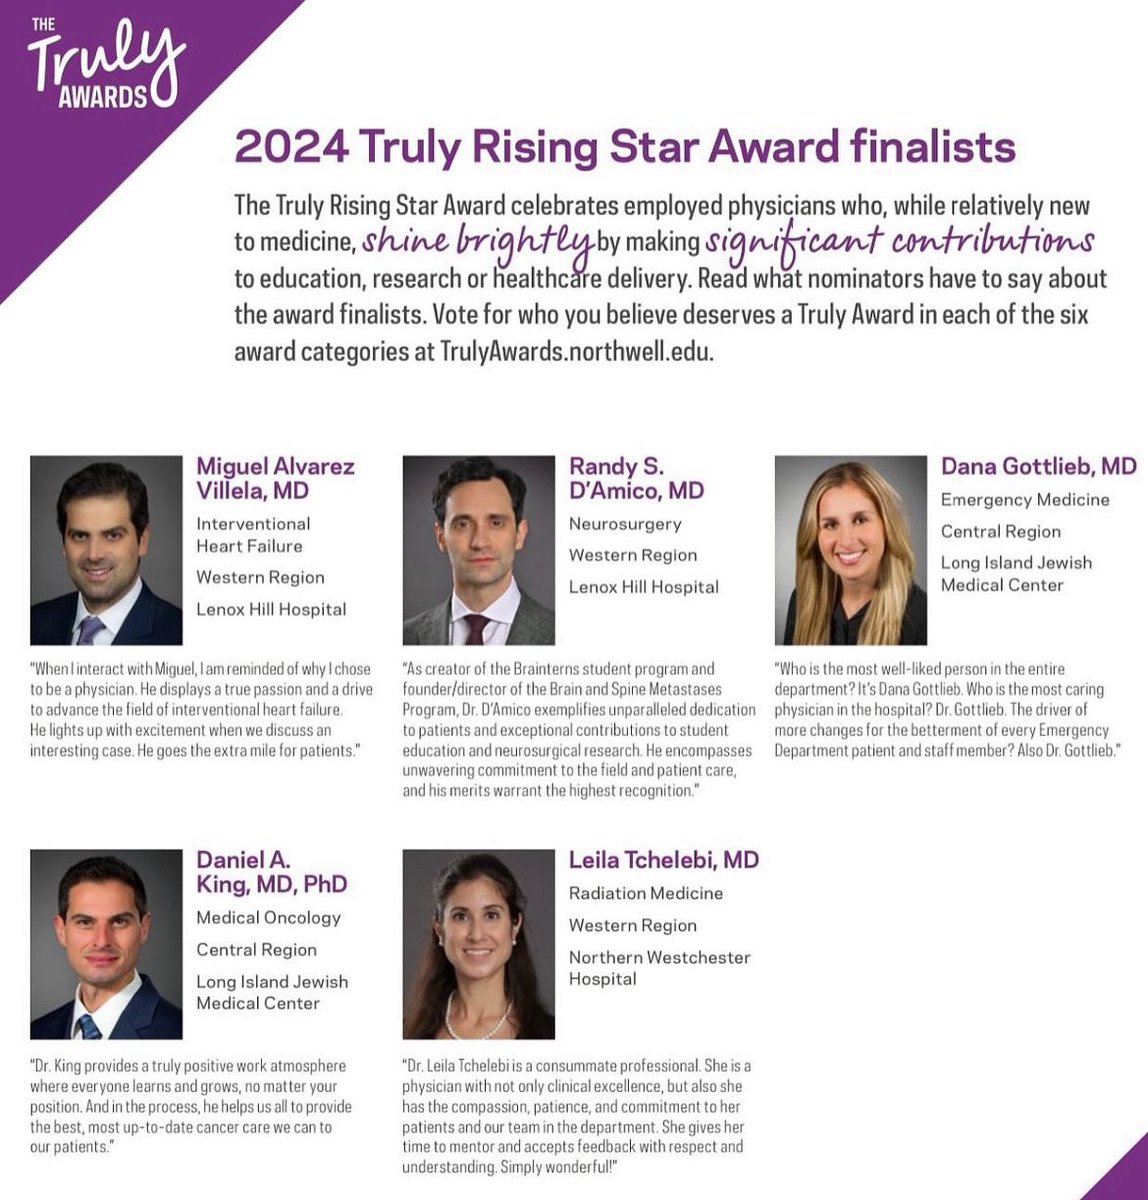 Congratulations to Dr. @RandyDAmico_MD on being named one of @NorthwellHealth’s Truly Rising Star Award finalists for the 2024 Truly Awards! 🌟🏆👏 You are an extraordinary provider and are truly deserving of this honor.